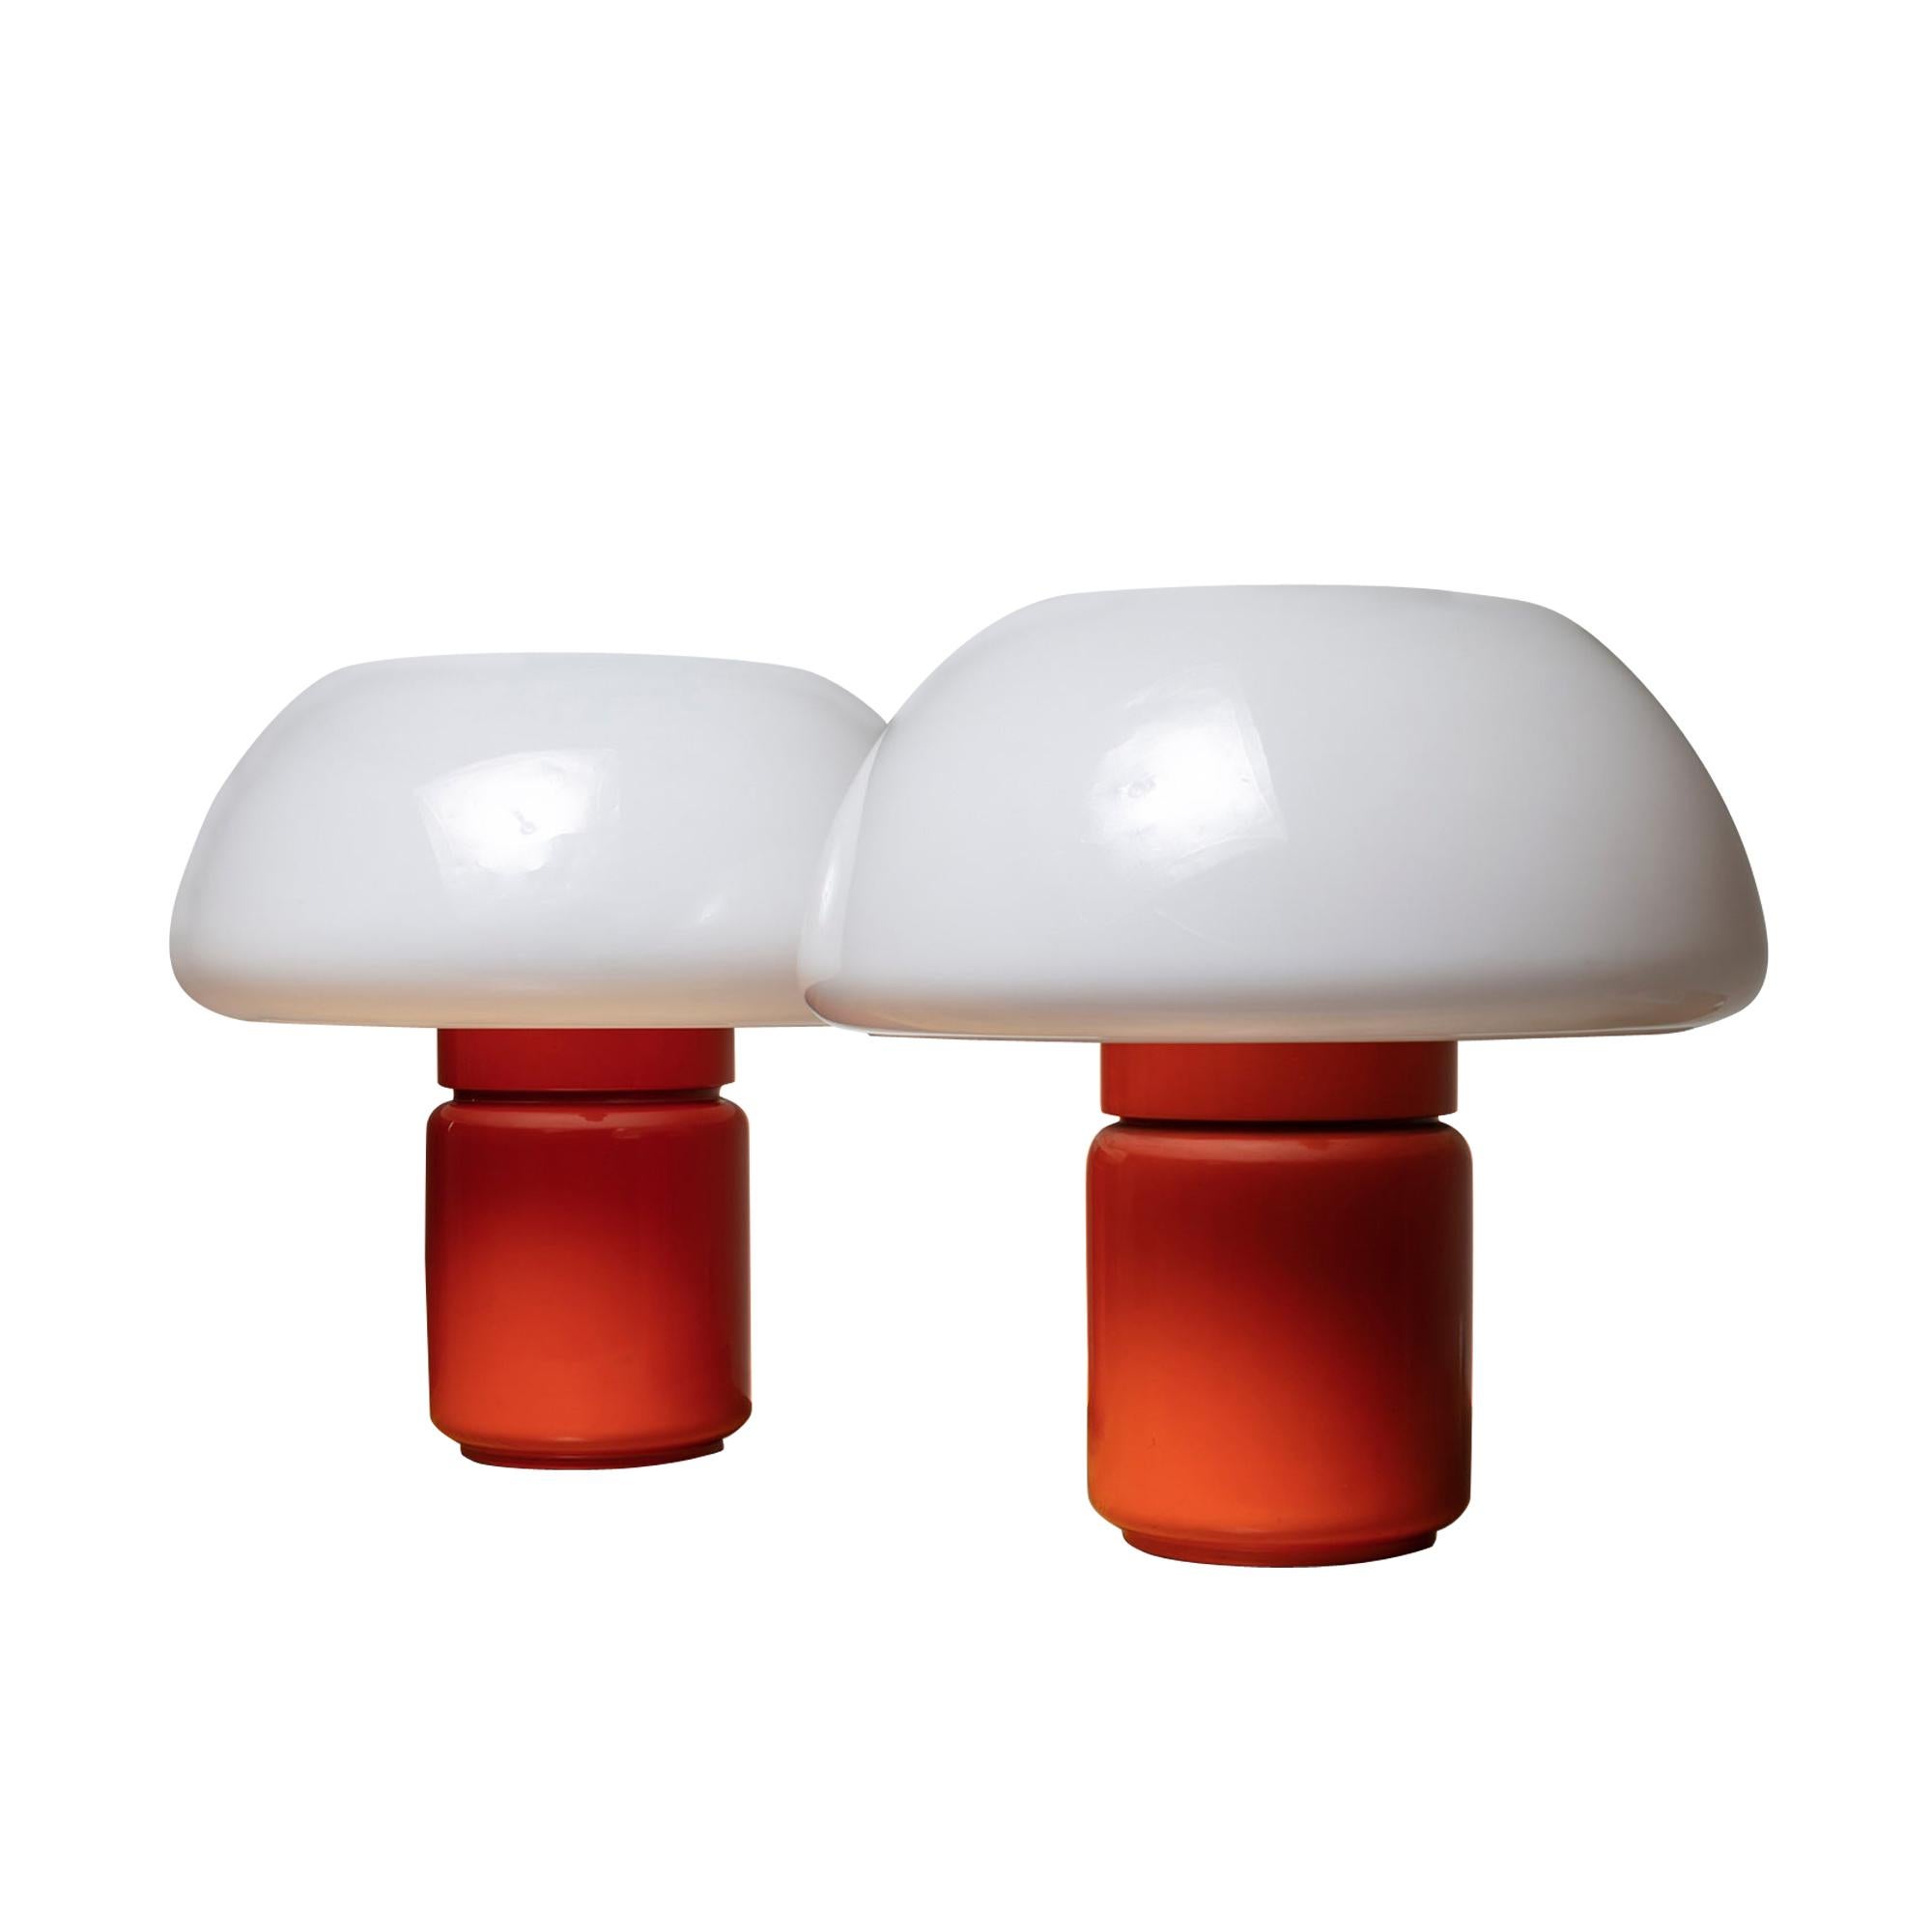 Pair of Model 625 Desk Lamps by Elio Martinelli for Martinelli Luce